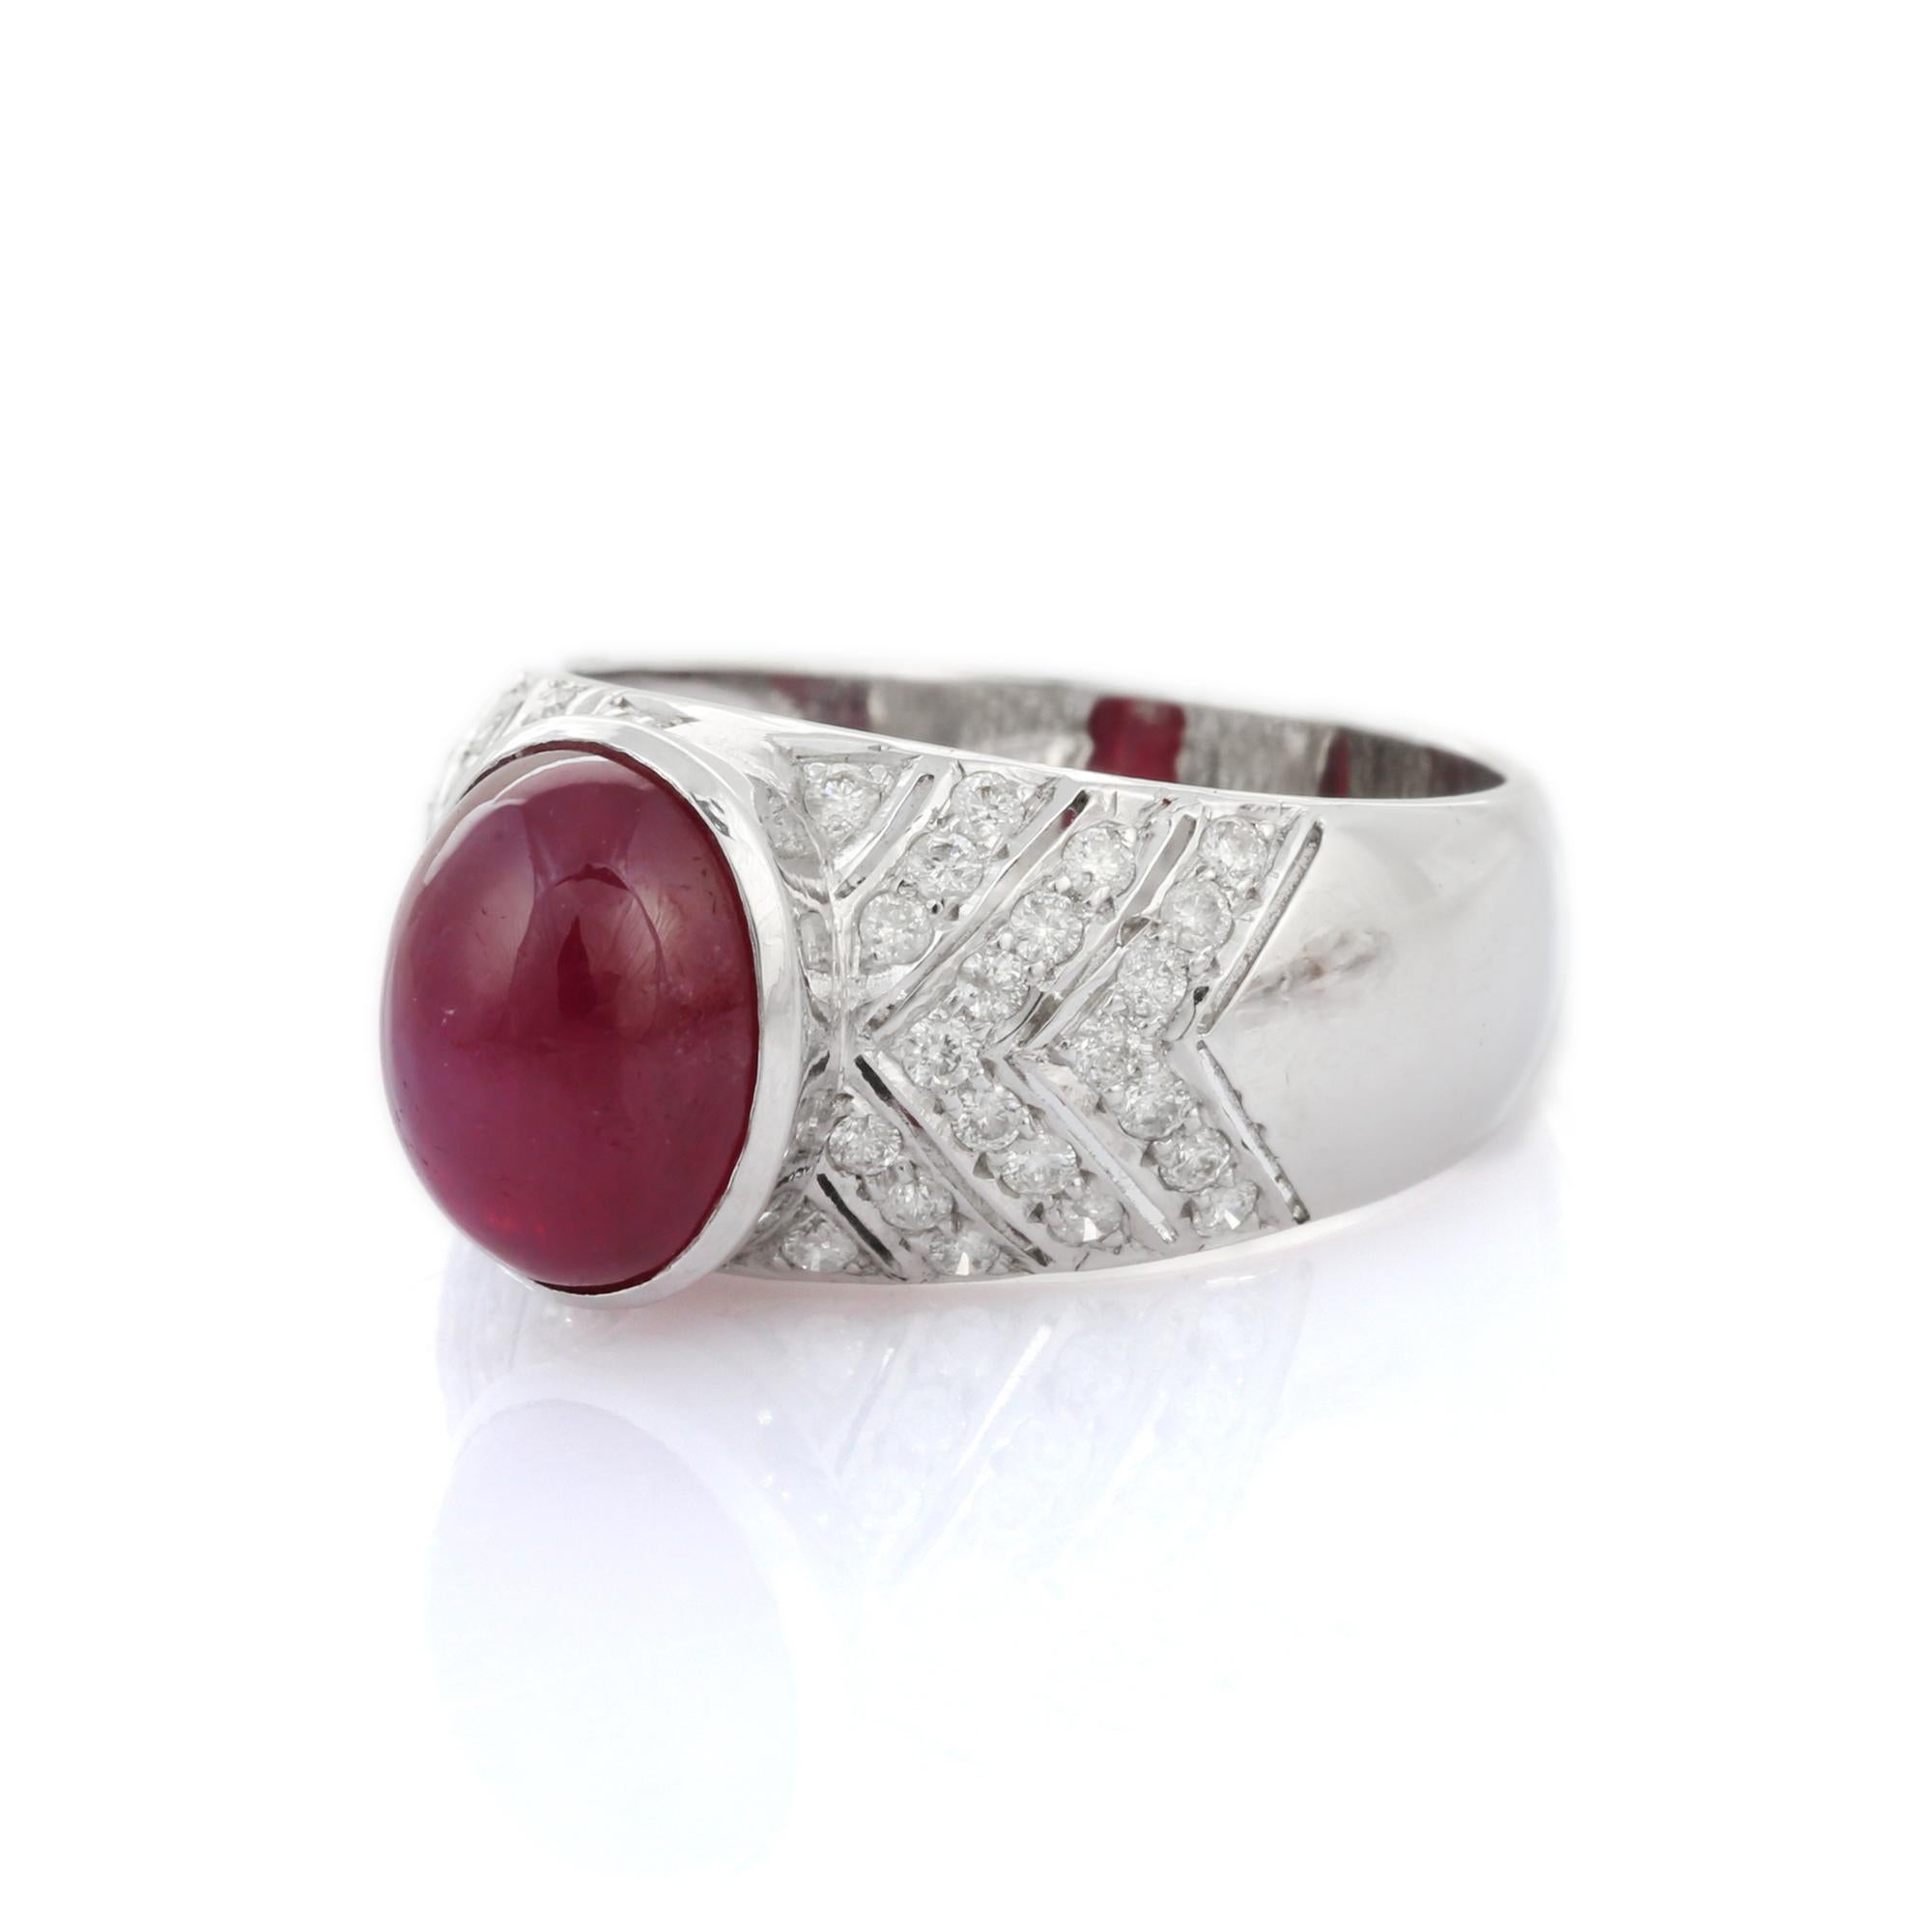 For Sale:  4.56 Carat Cabochon Ruby Cocktail Ring with Diamonds in 14K Solid White Gold 3